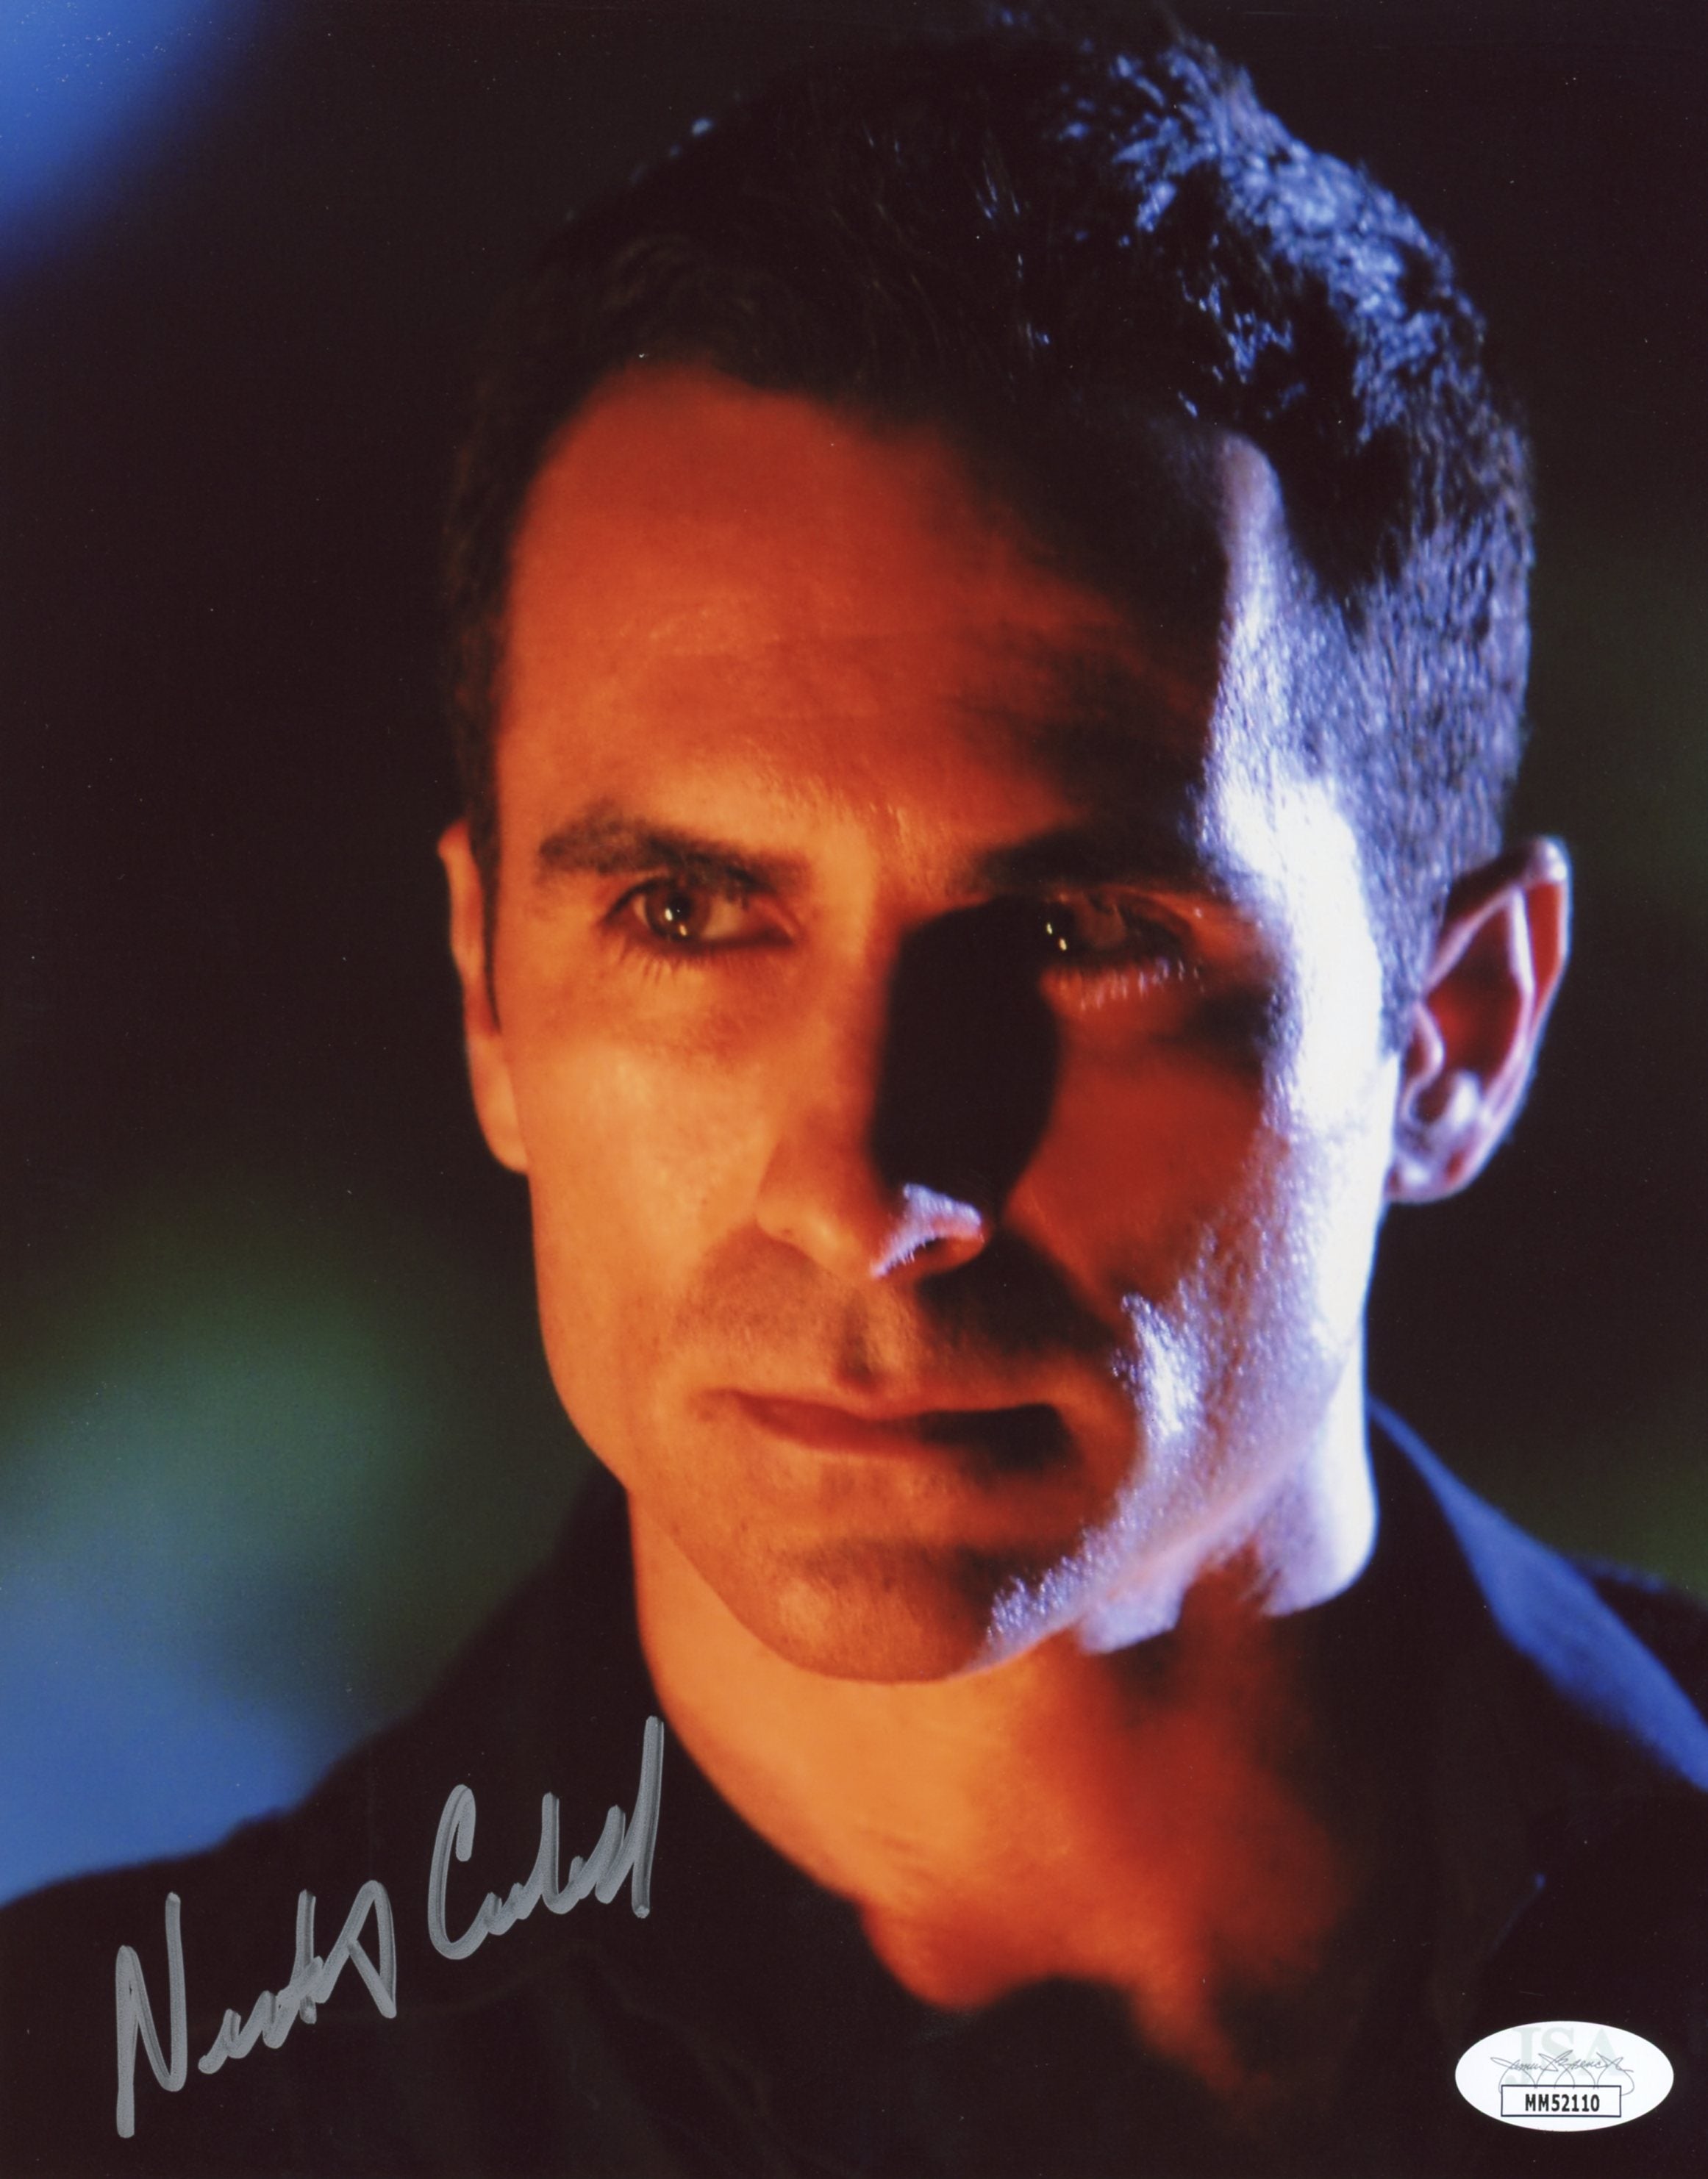 Nestor Carbonell Lost 8x10 Photo Signed Autograph JSA Certified COA Auto